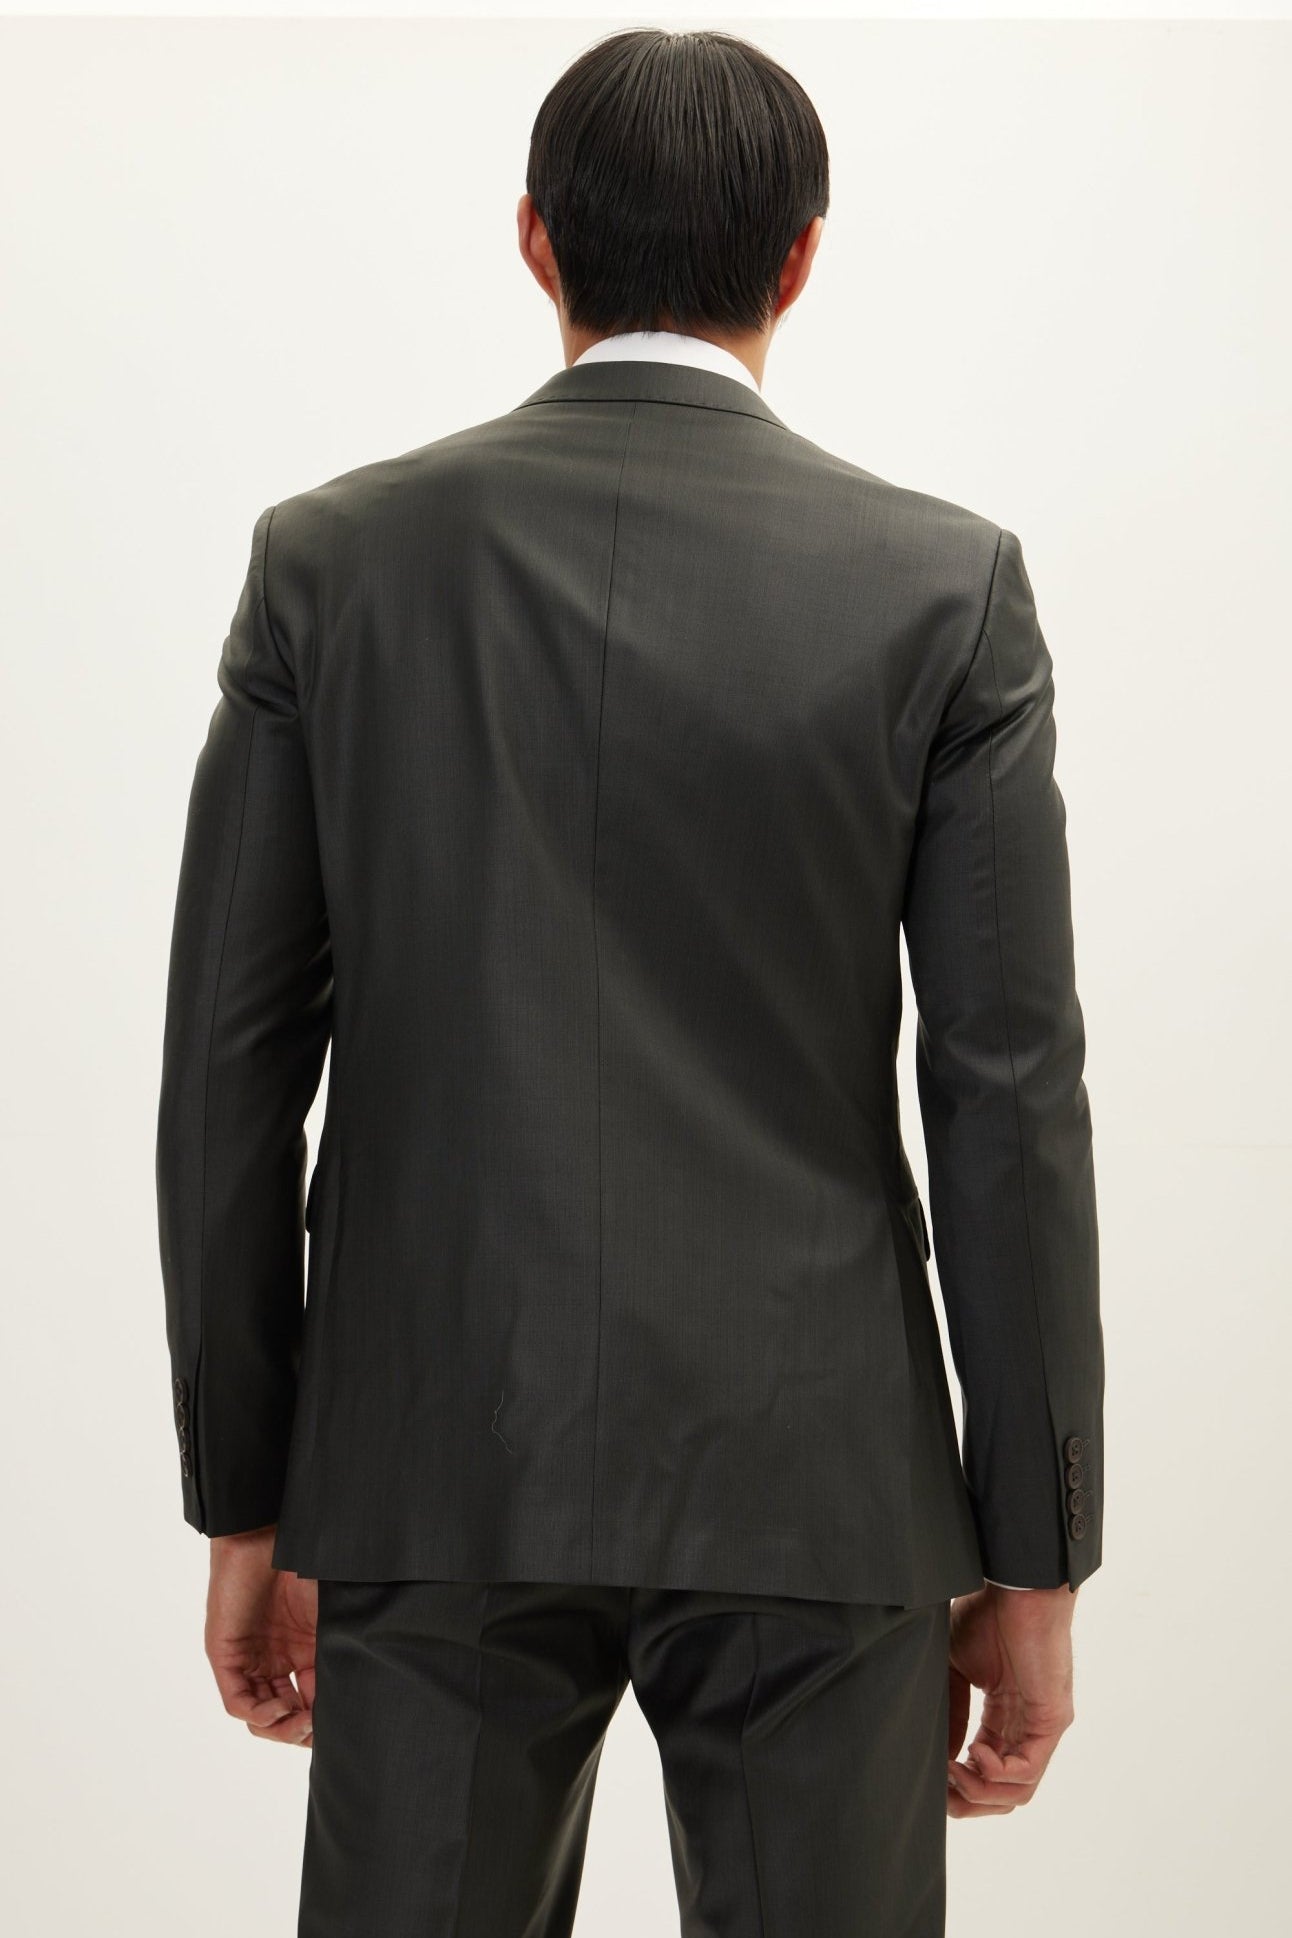 Merino Wool Double Breasted Suit - Charcoal - Ron Tomson